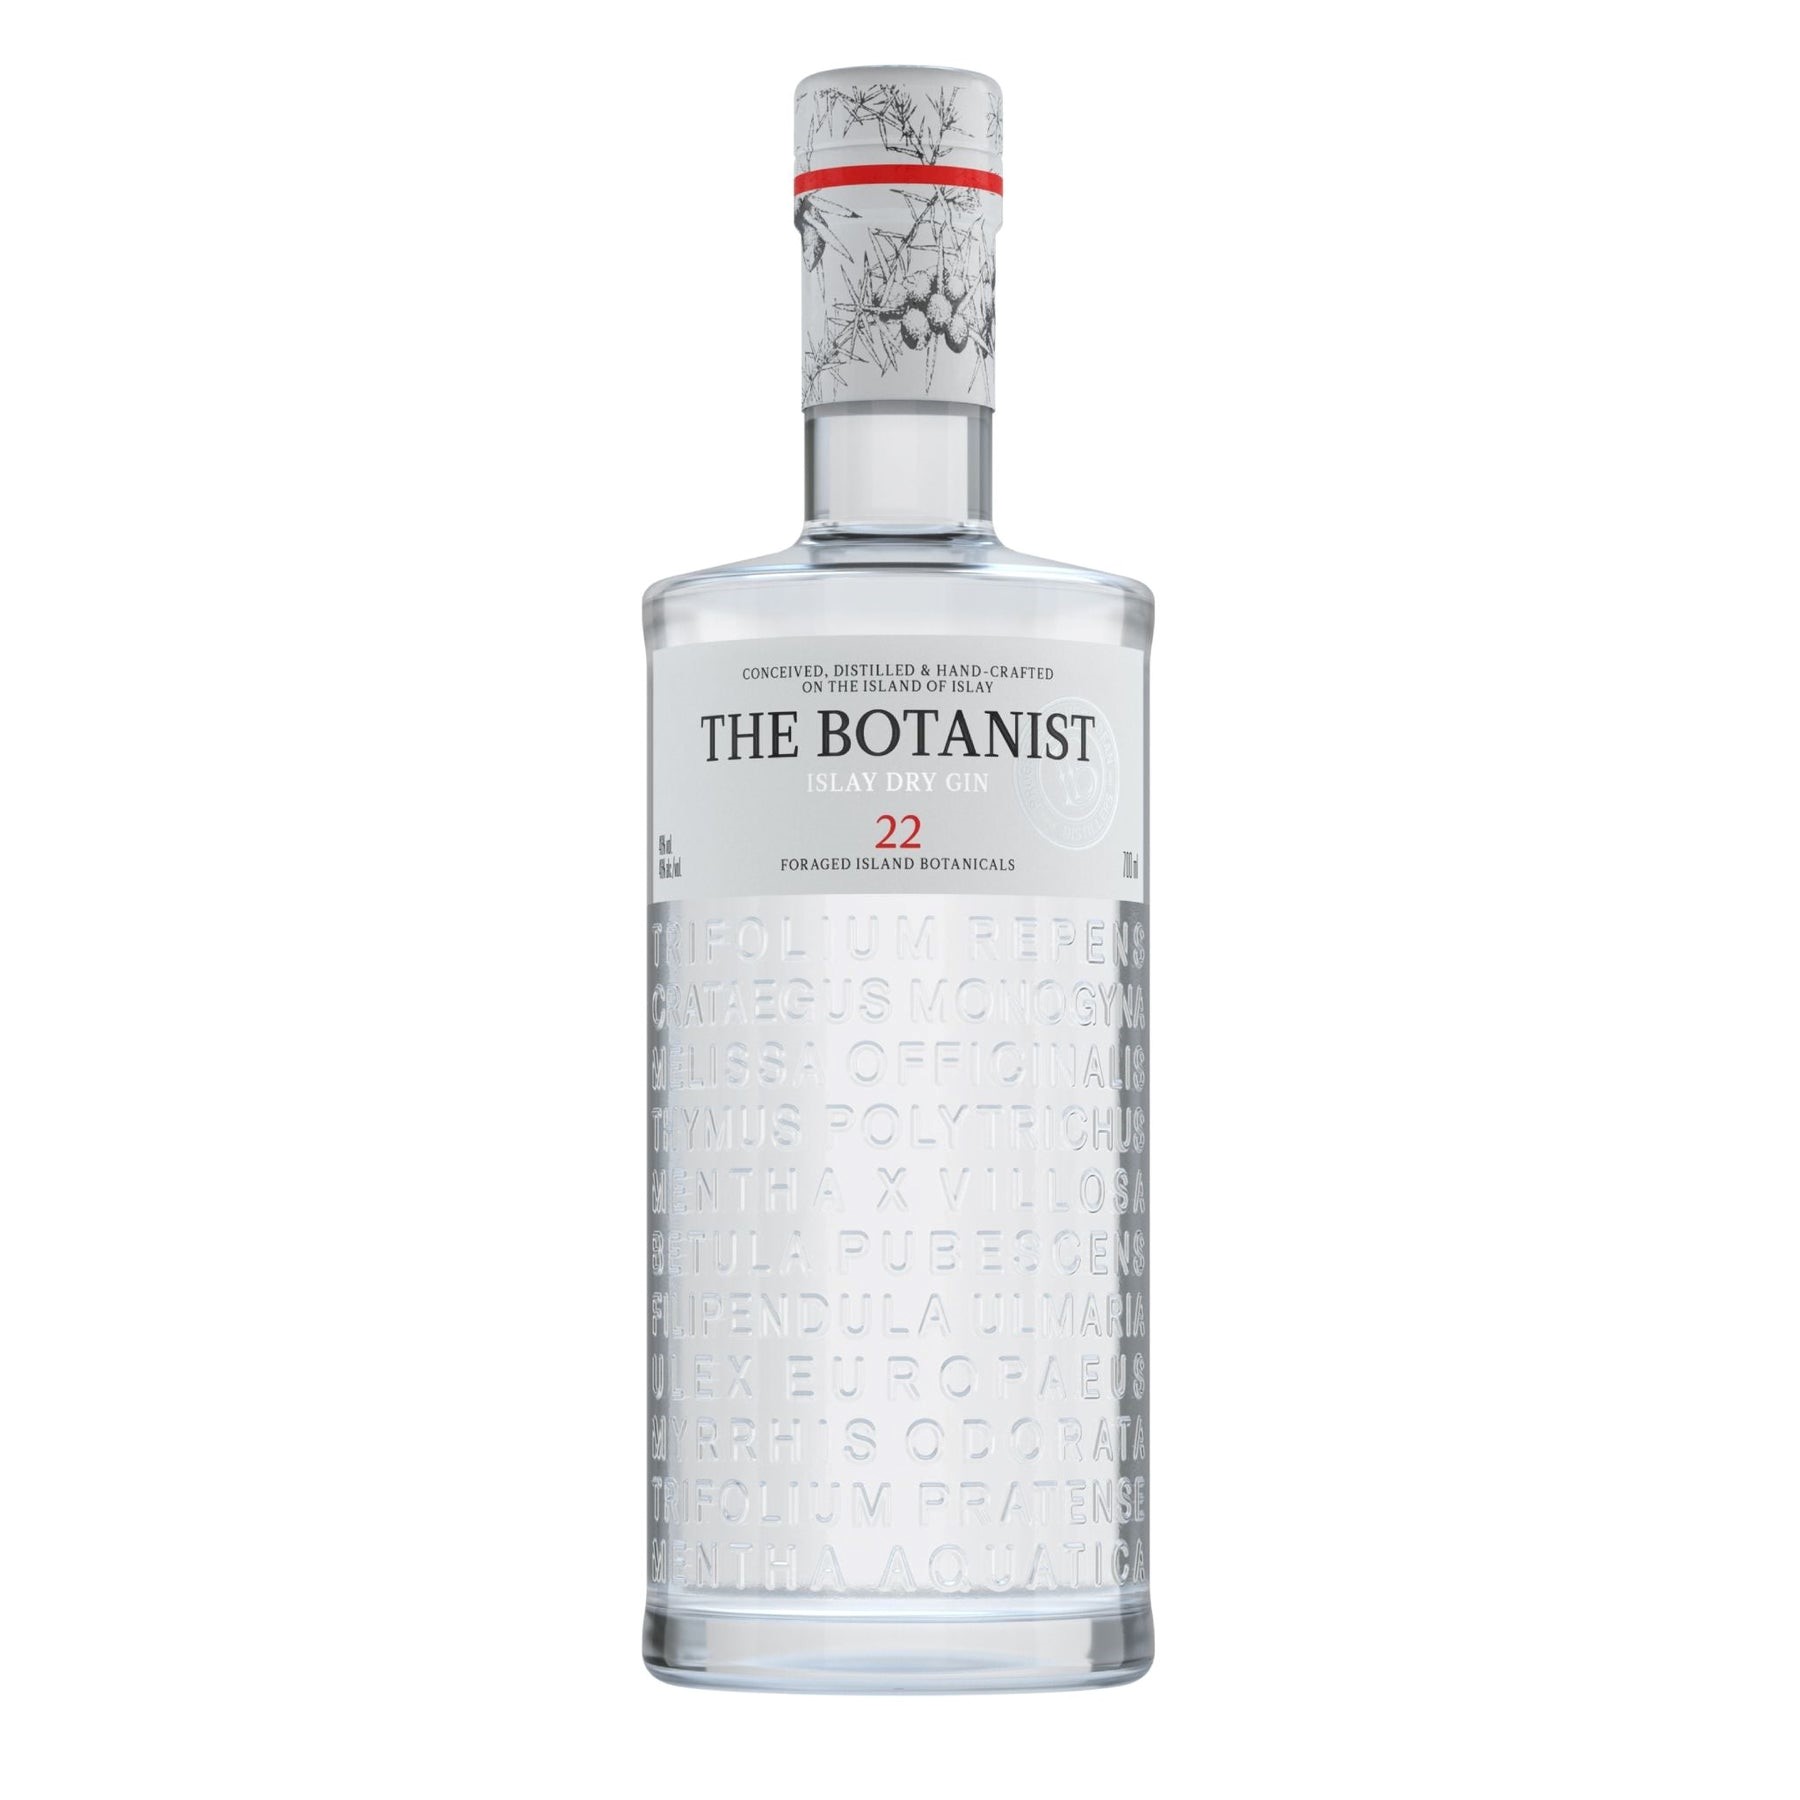 An image of The Botanist Gin, perfect for on the rocks cocktails or warm holiday libations.